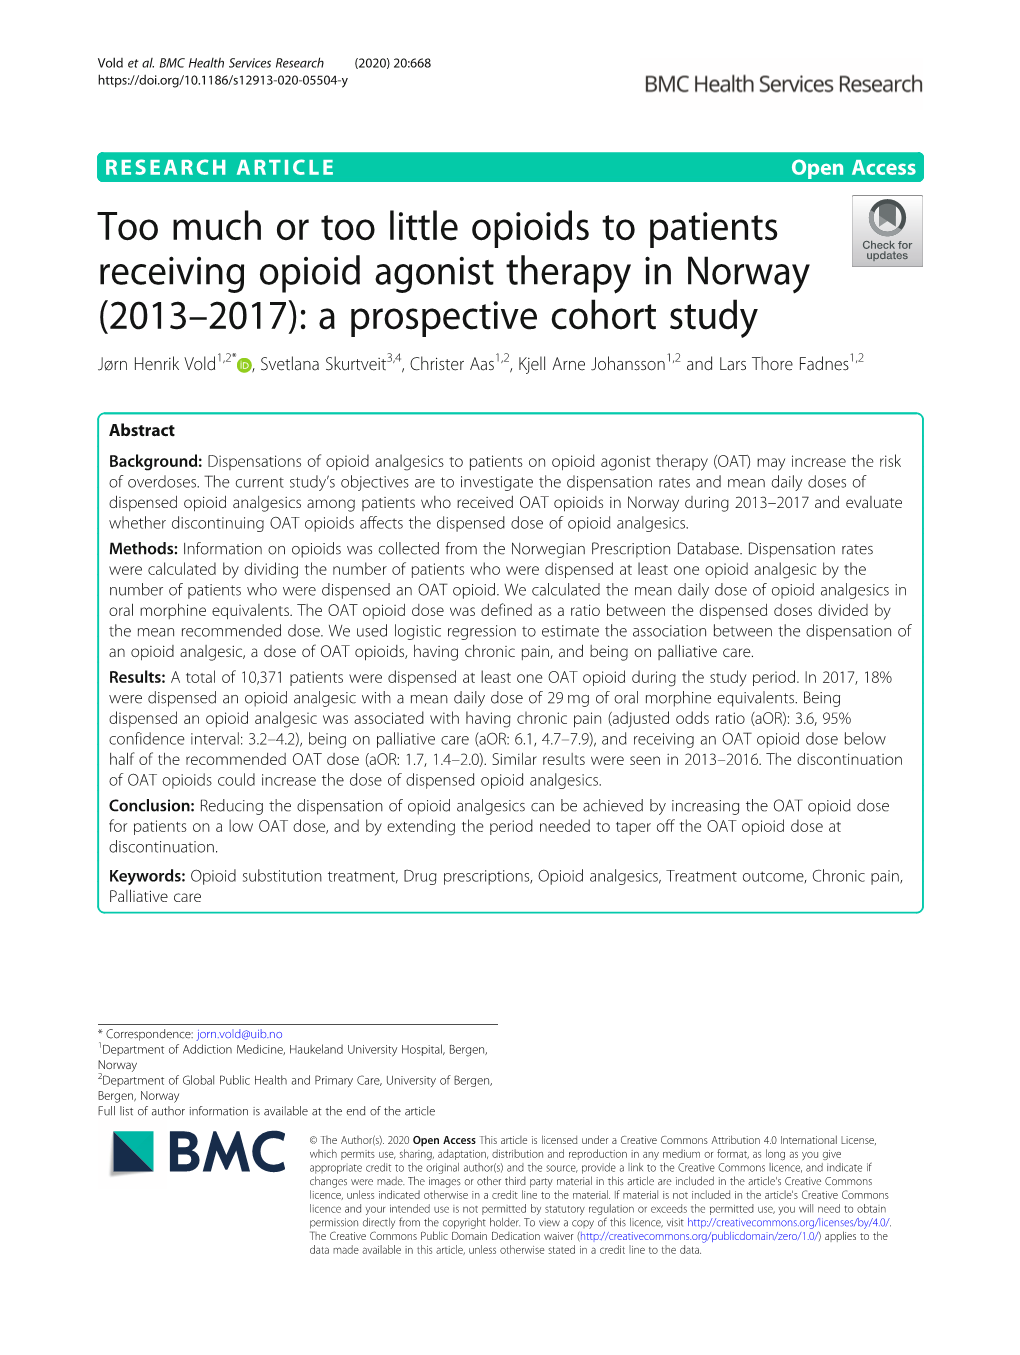 Too Much Or Too Little Opioids to Patients Receiving Opioid Agonist